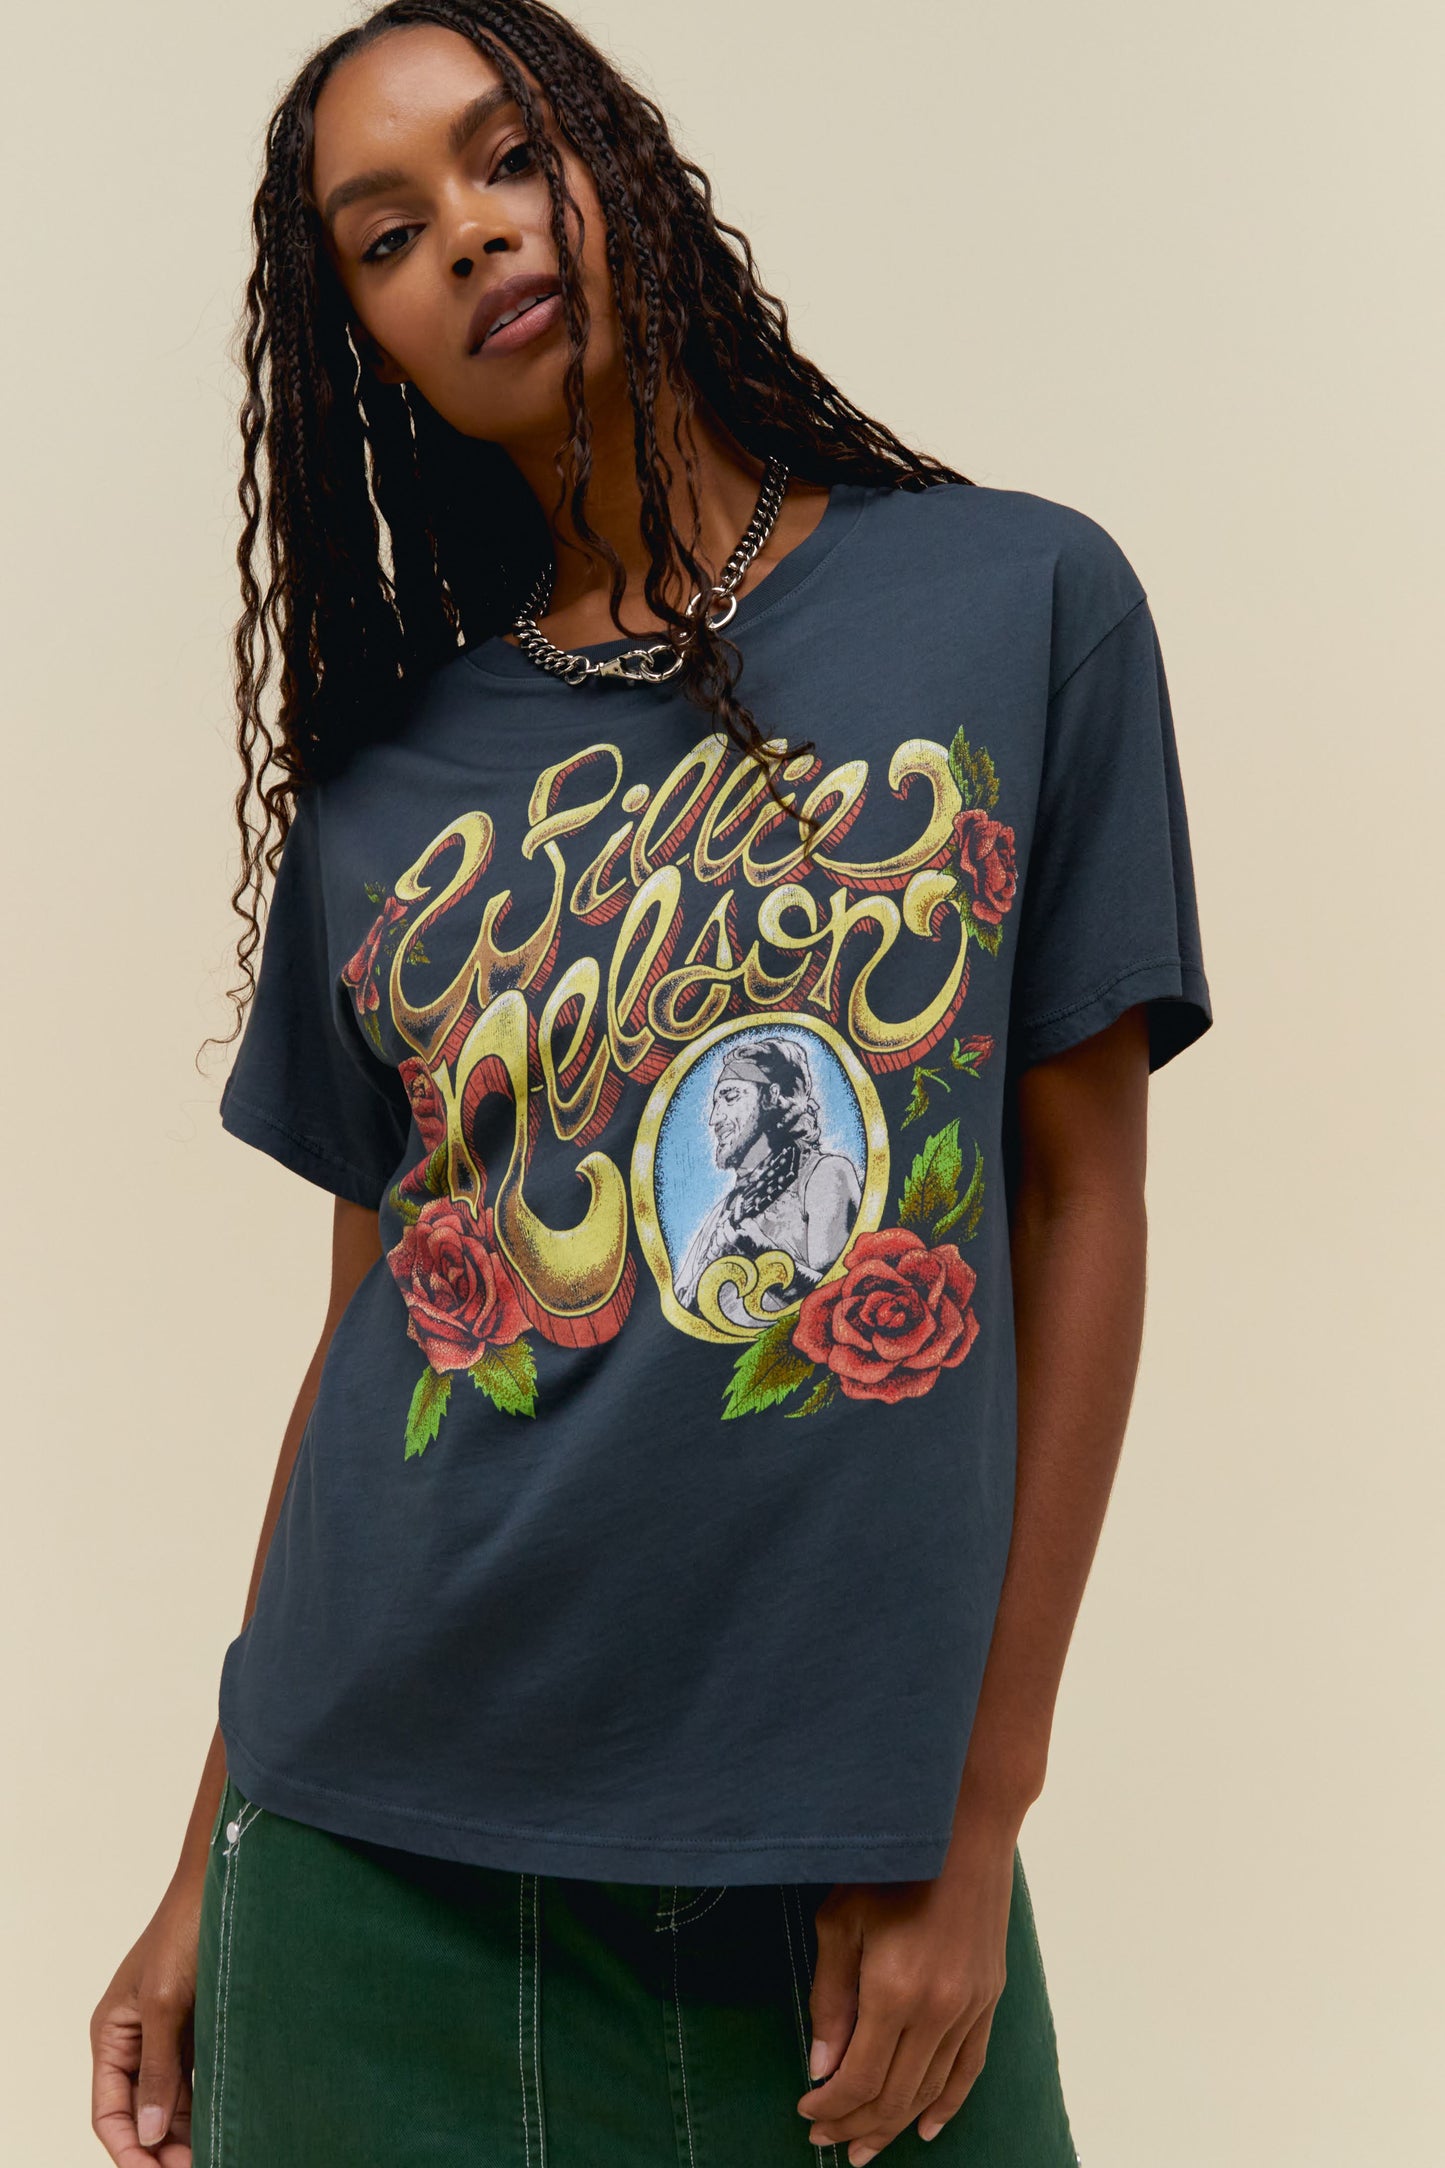 A model featuring a black tee stamped with "Willie Nelson" designed with roses around.